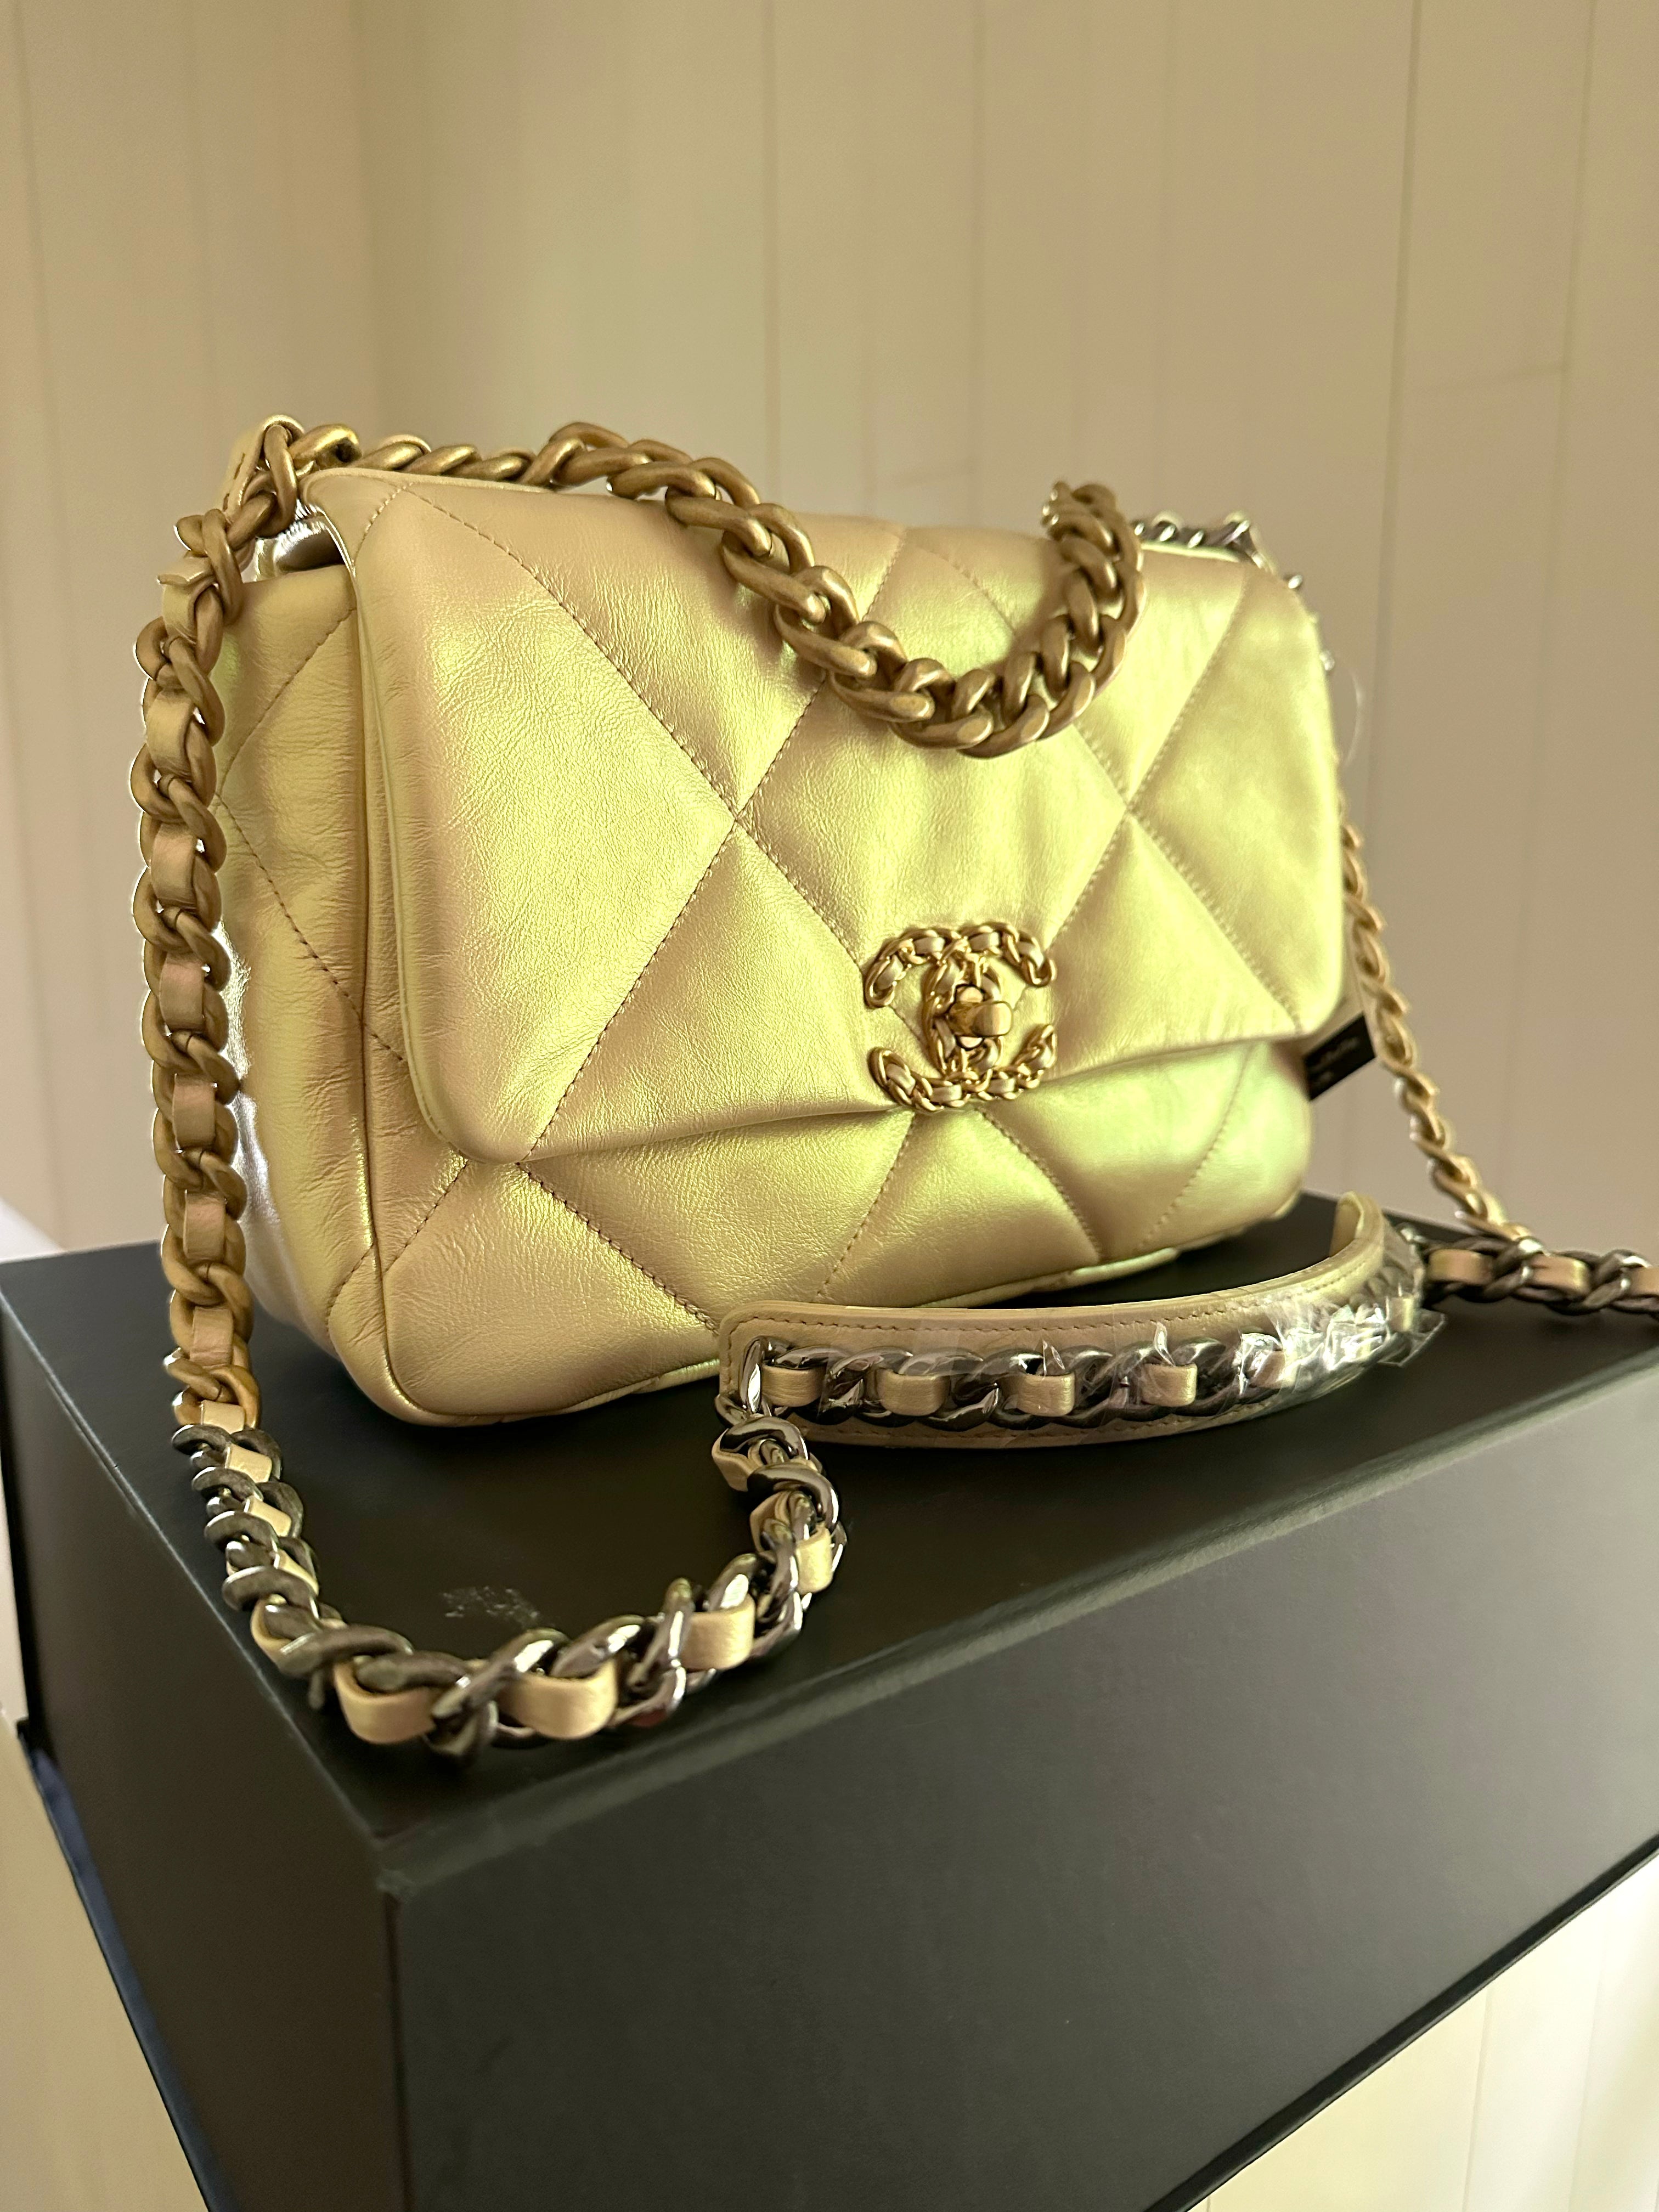 Chanel Mini Flap bag review  Is it worth it